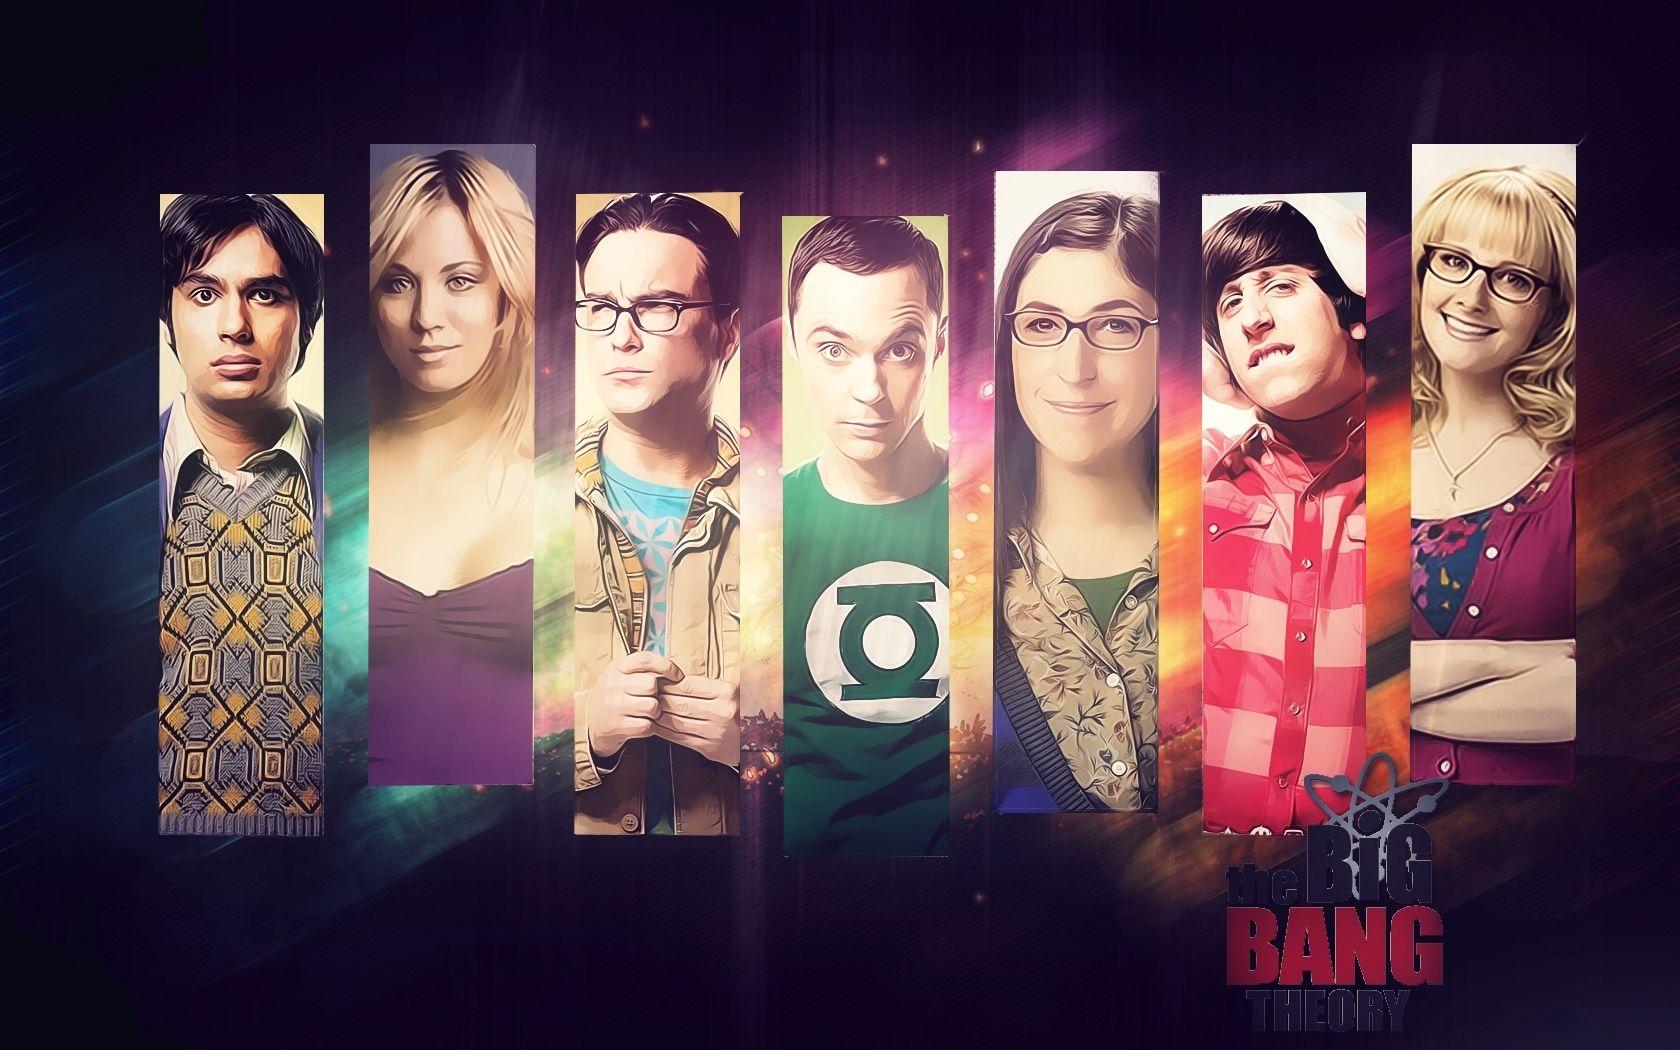 The Big Bang Theory Wallpapers and Backgrounds Image.